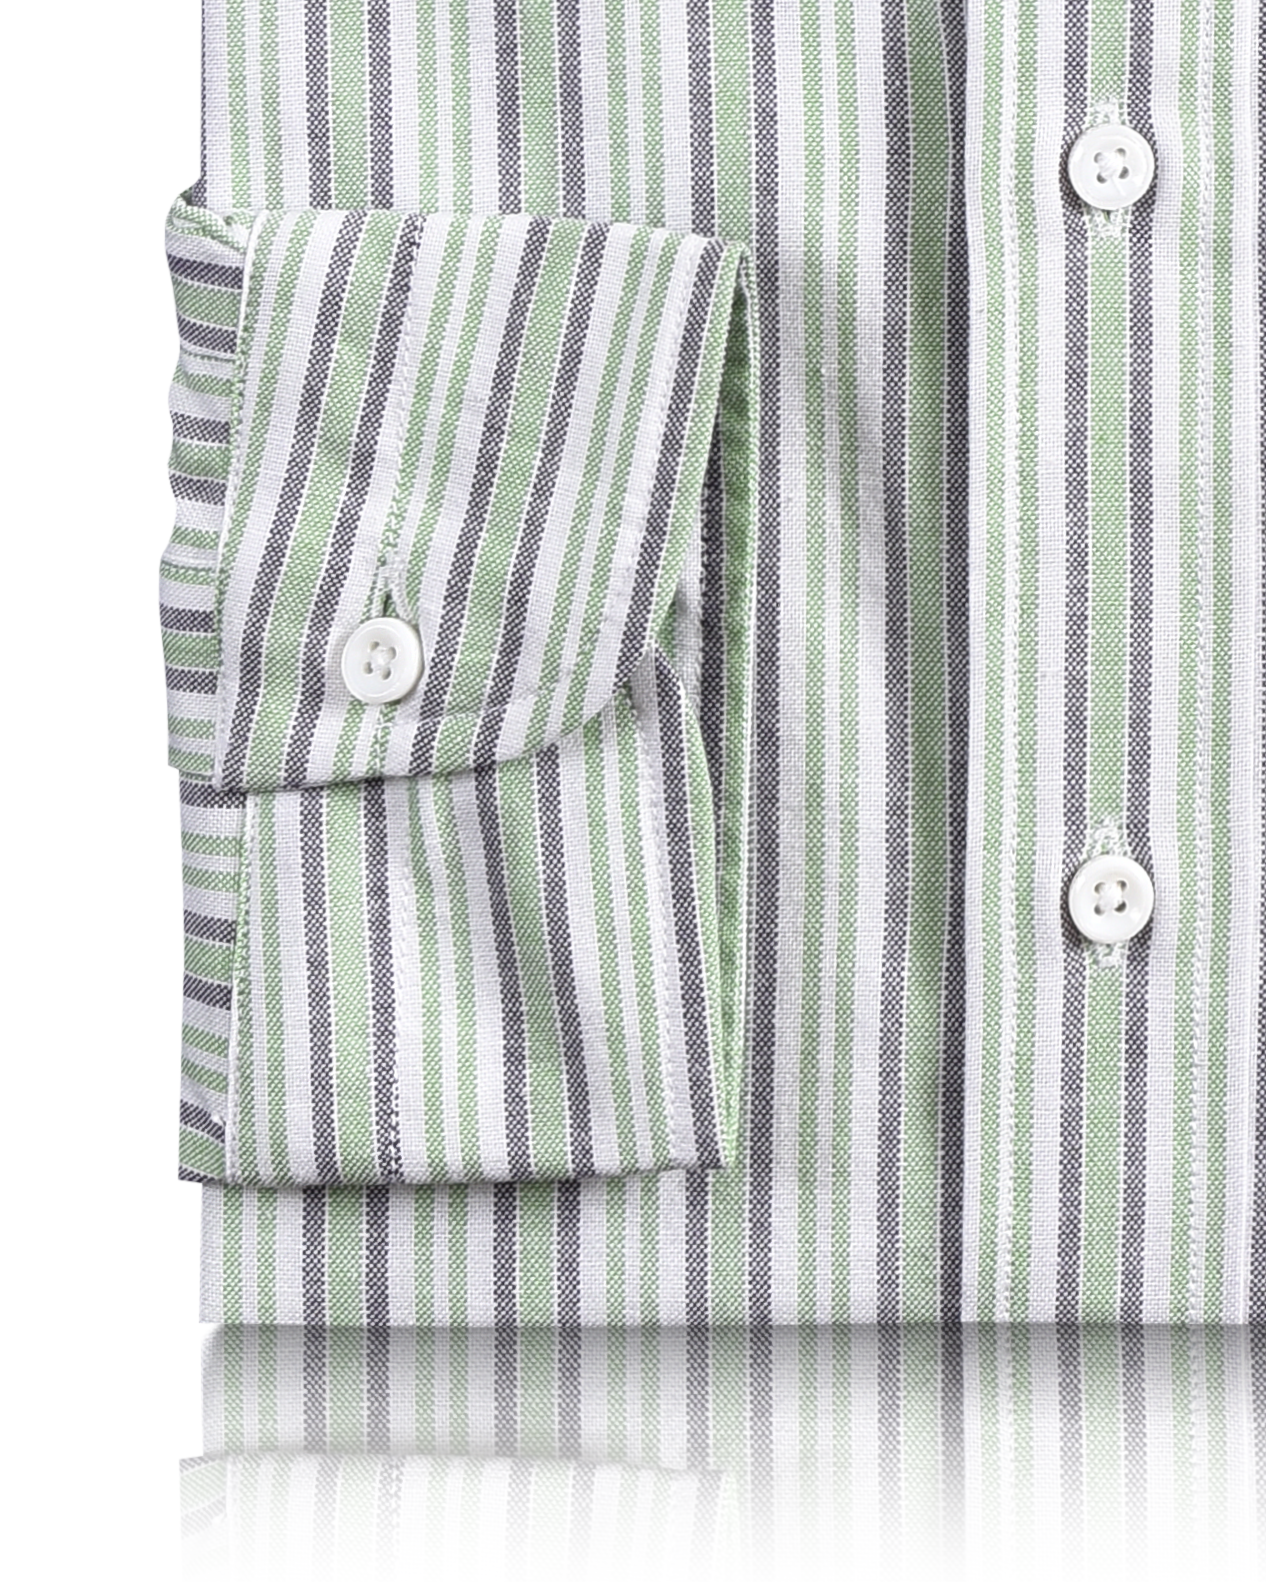 Cuff of the custom oxford shirt for men by Luxire in shades of green